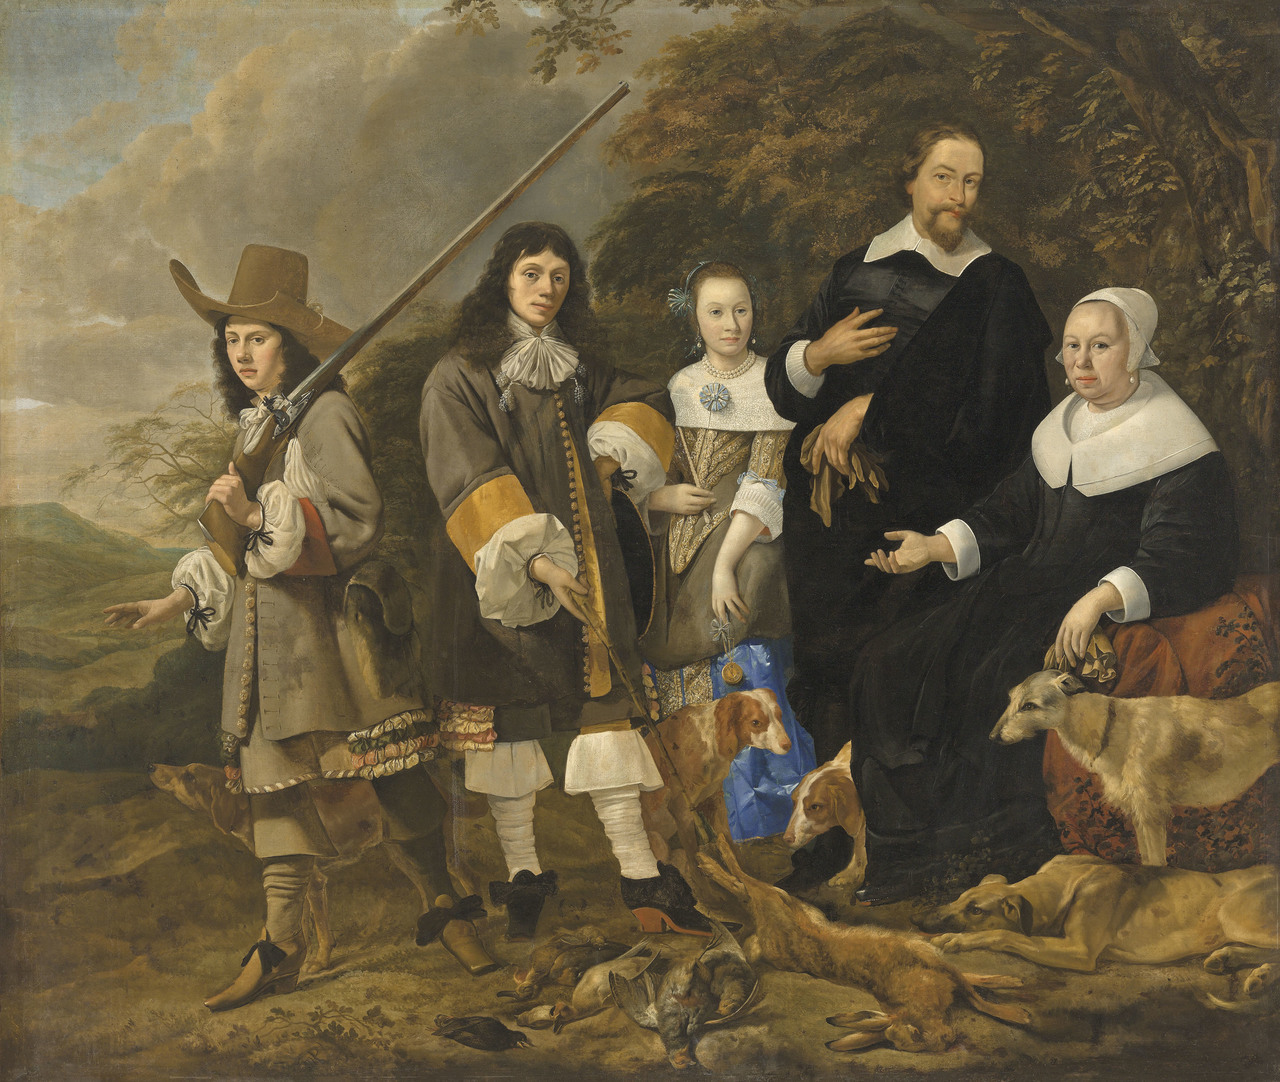 Dirck Carbasius (1619-1681), â€˜Portrait of a family, returning from a huntâ€™, 1600s, Dutch, oil on canvas, currently for sale est. 40,000-60,000 GBP in Christieâ€™s Old Masters Day sale, July 2019